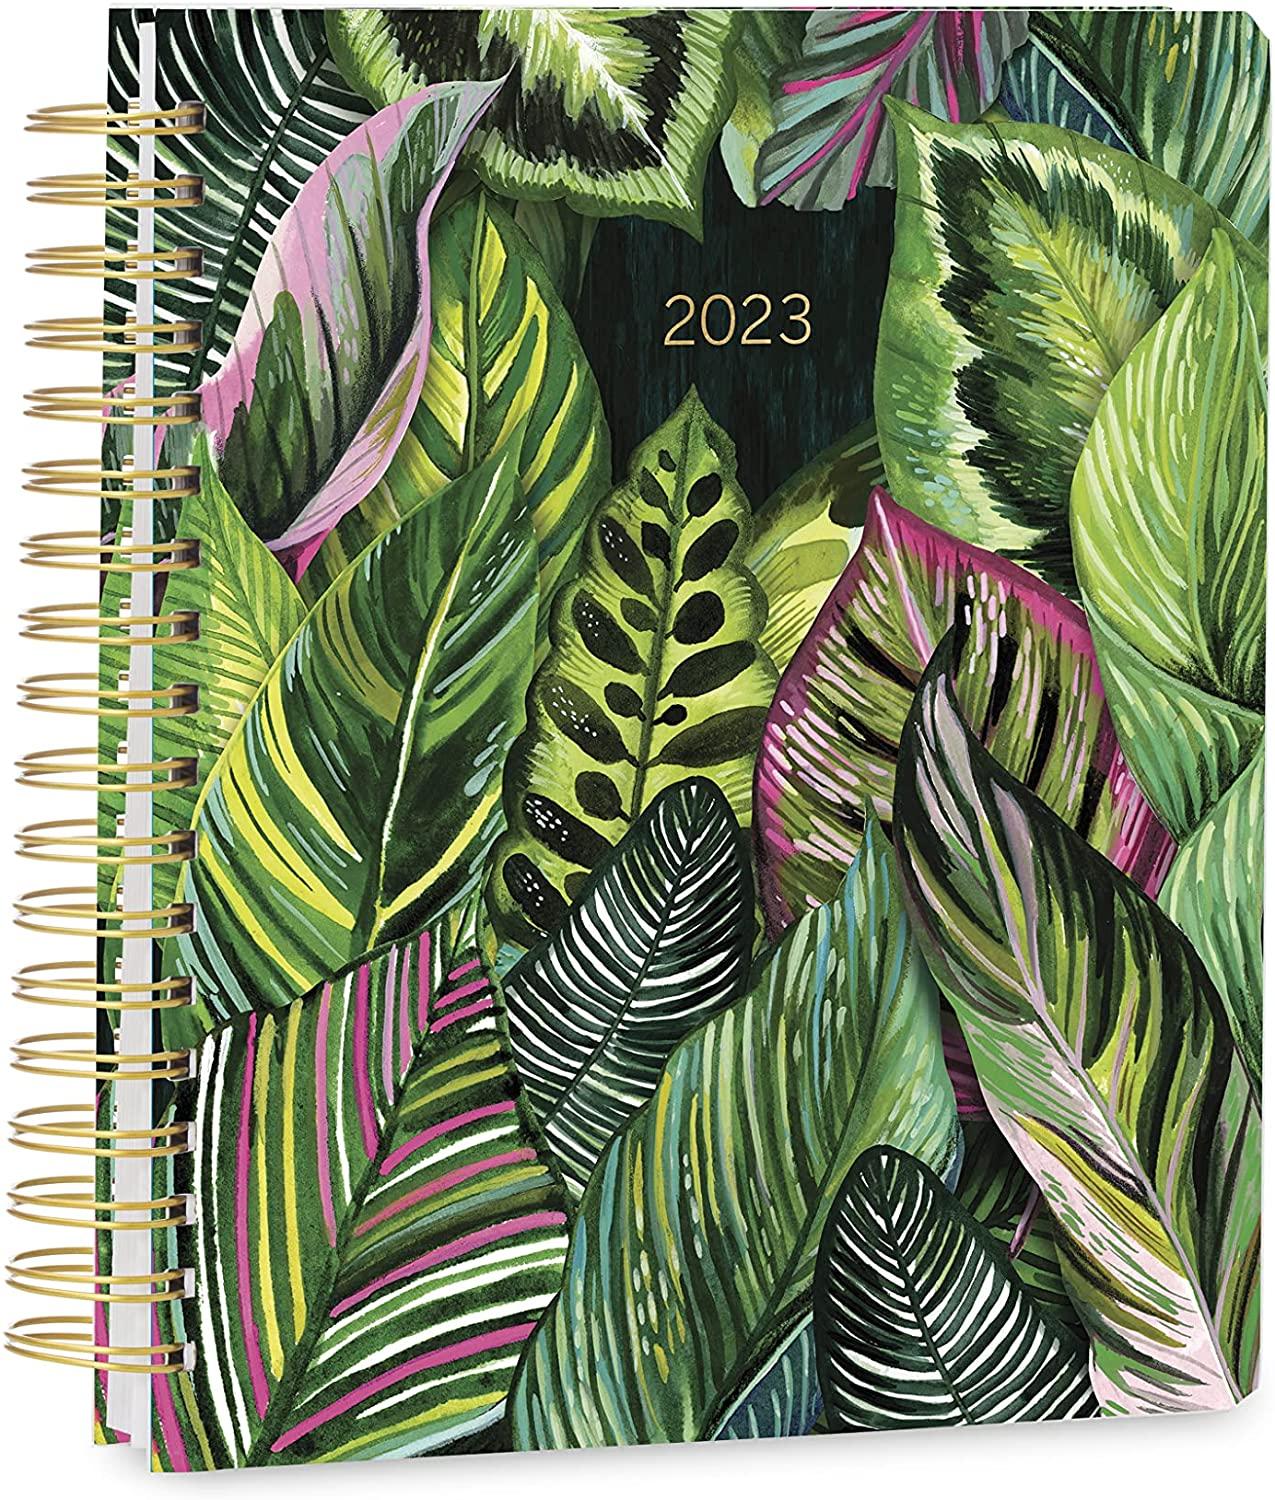 Greenery 2023 Deluxe Hardcover High Note Planner